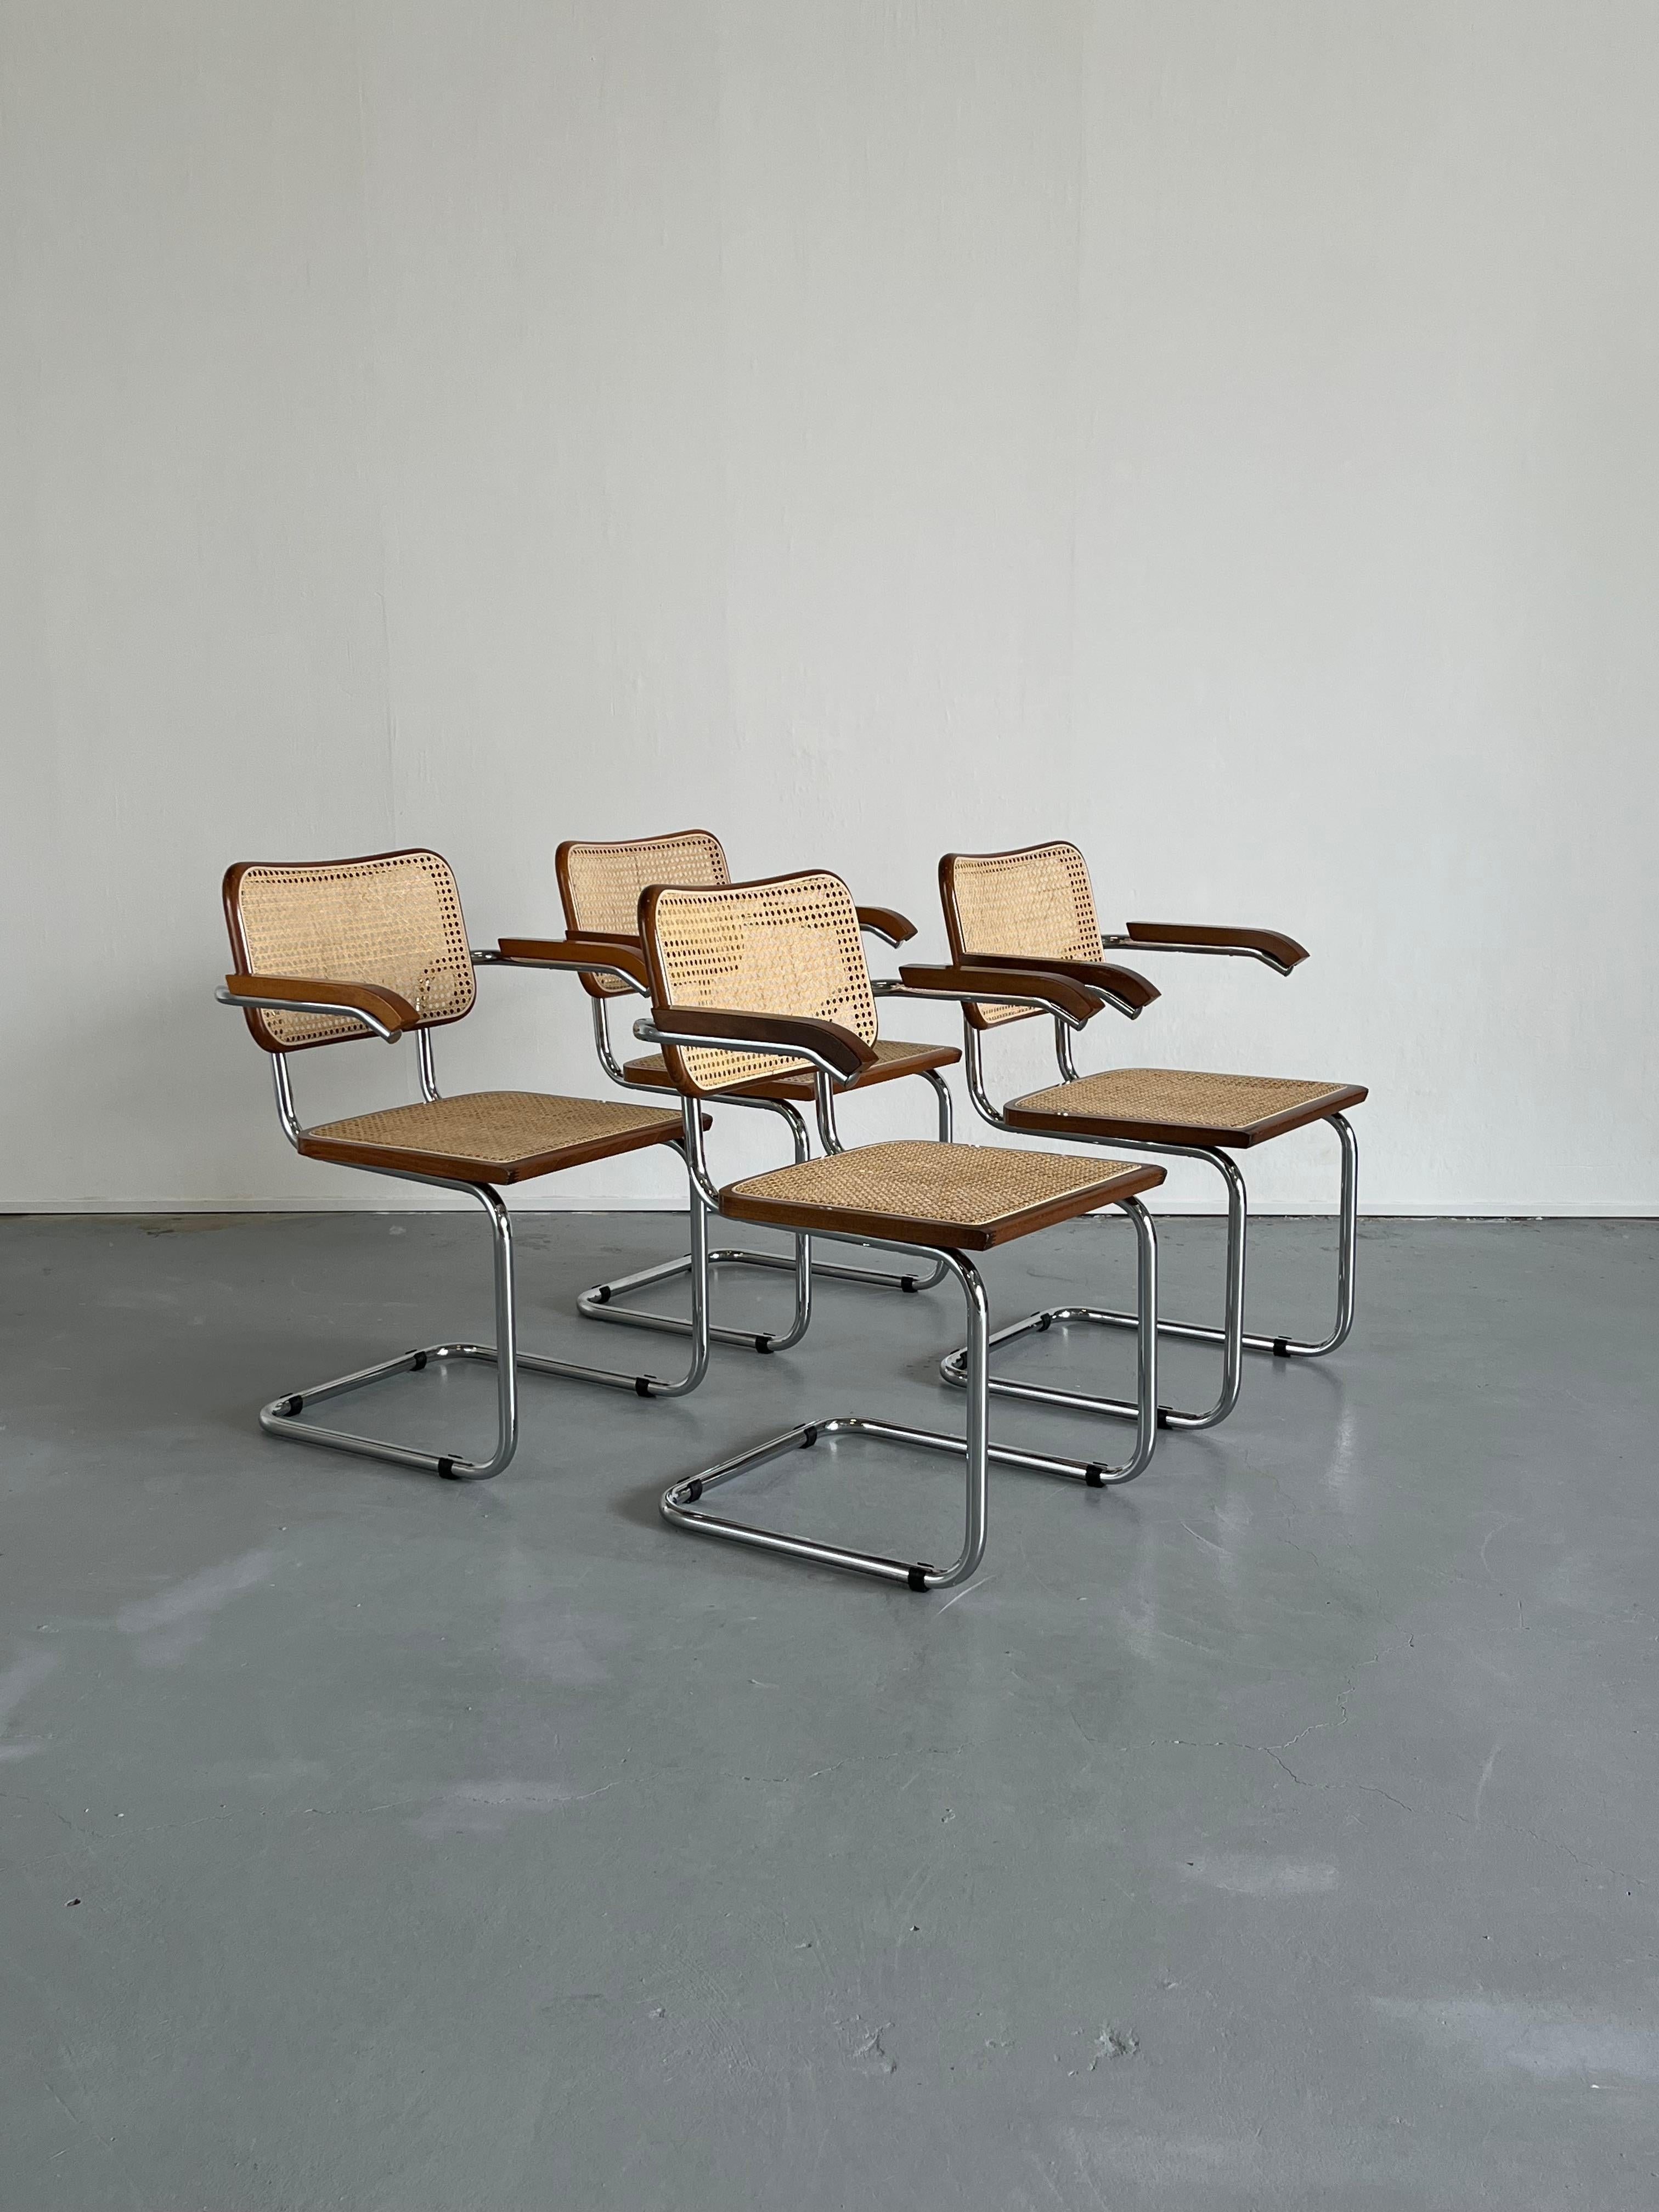 A set of four beautiful vintage Marcel Breuer design B64 cantilever chairs with armrests, in a rare lacquered walnut brown finish.
Completely original parts, and in original vintage condition. 

Vintage 1980s or 1990s Italian